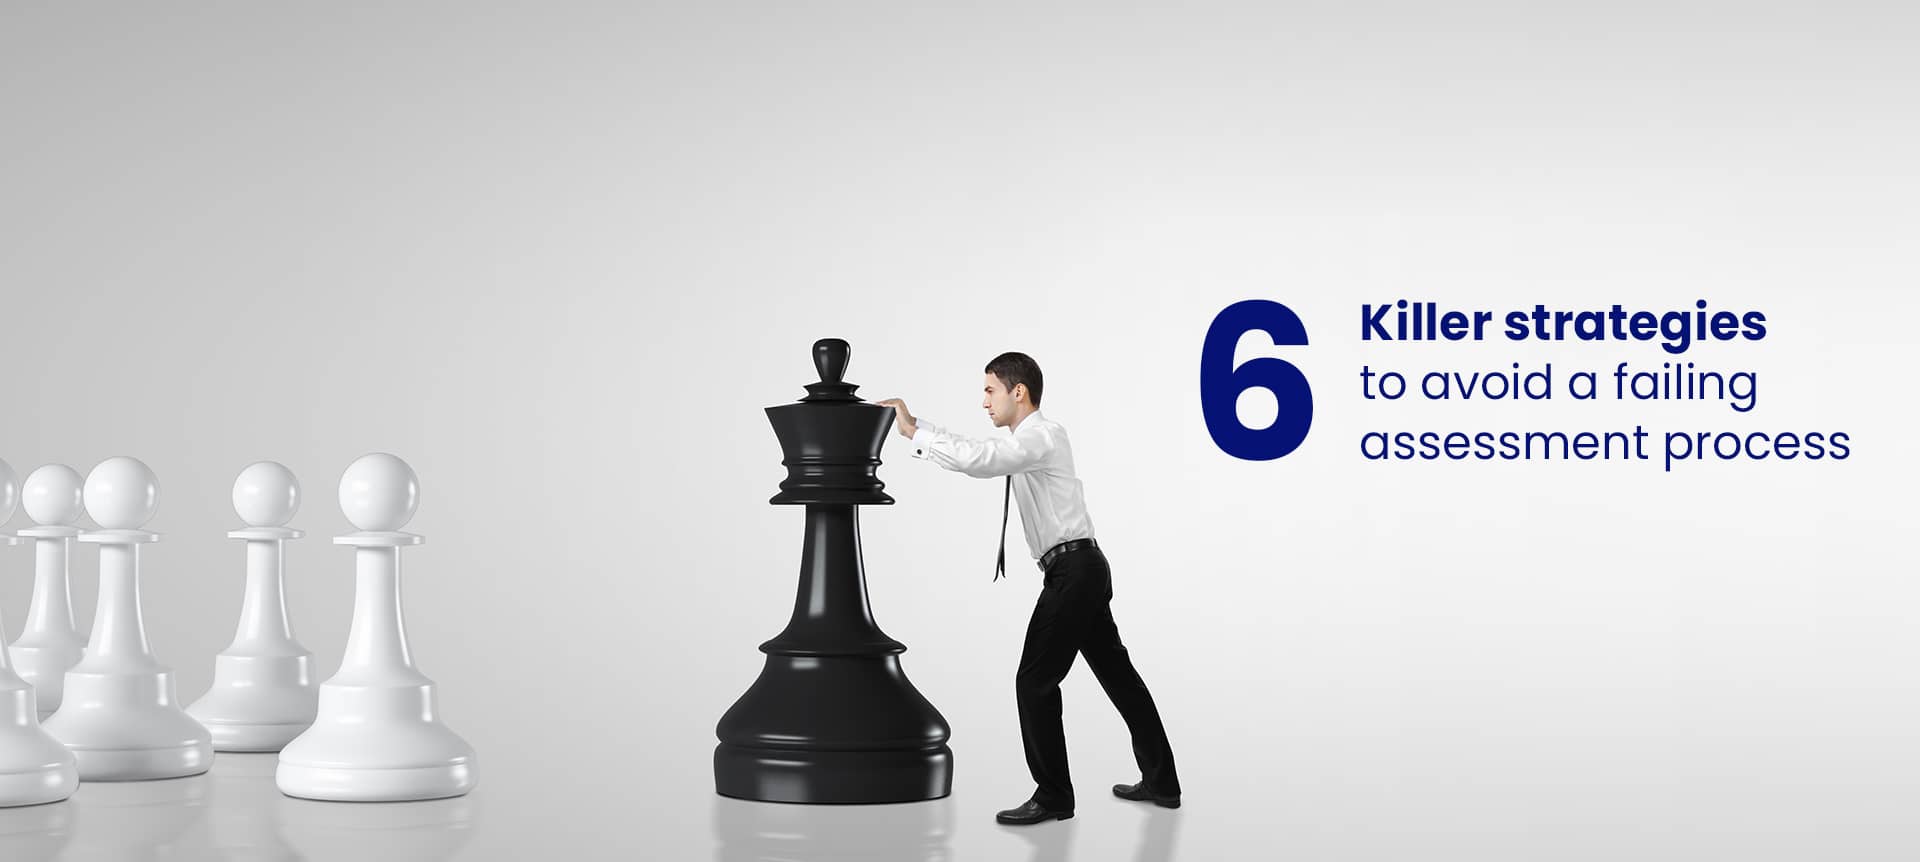 An employee pushing a huge chess piece, symbolizing trying to avoid a failing assessment process. 